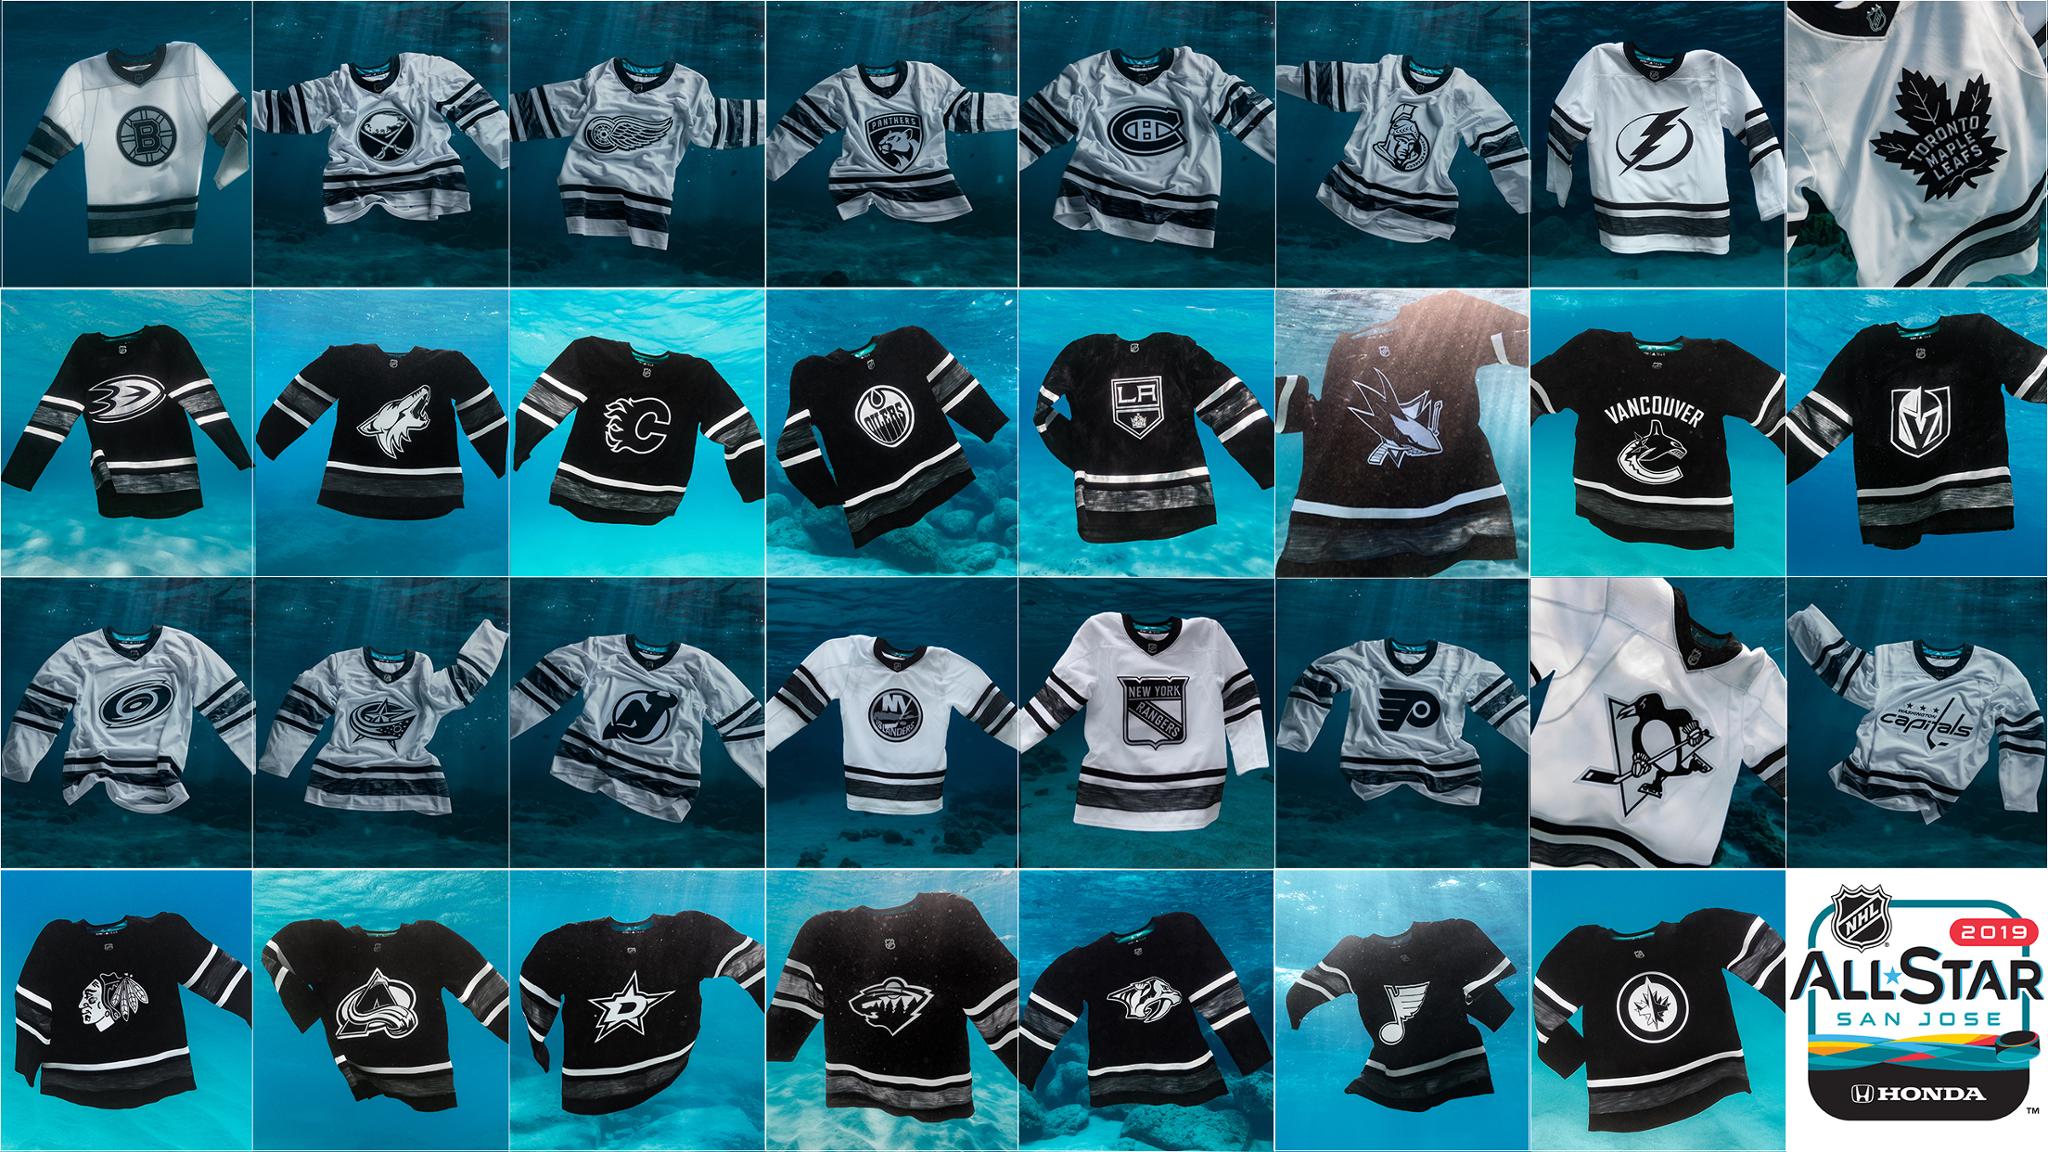 adidas parley all star jersey